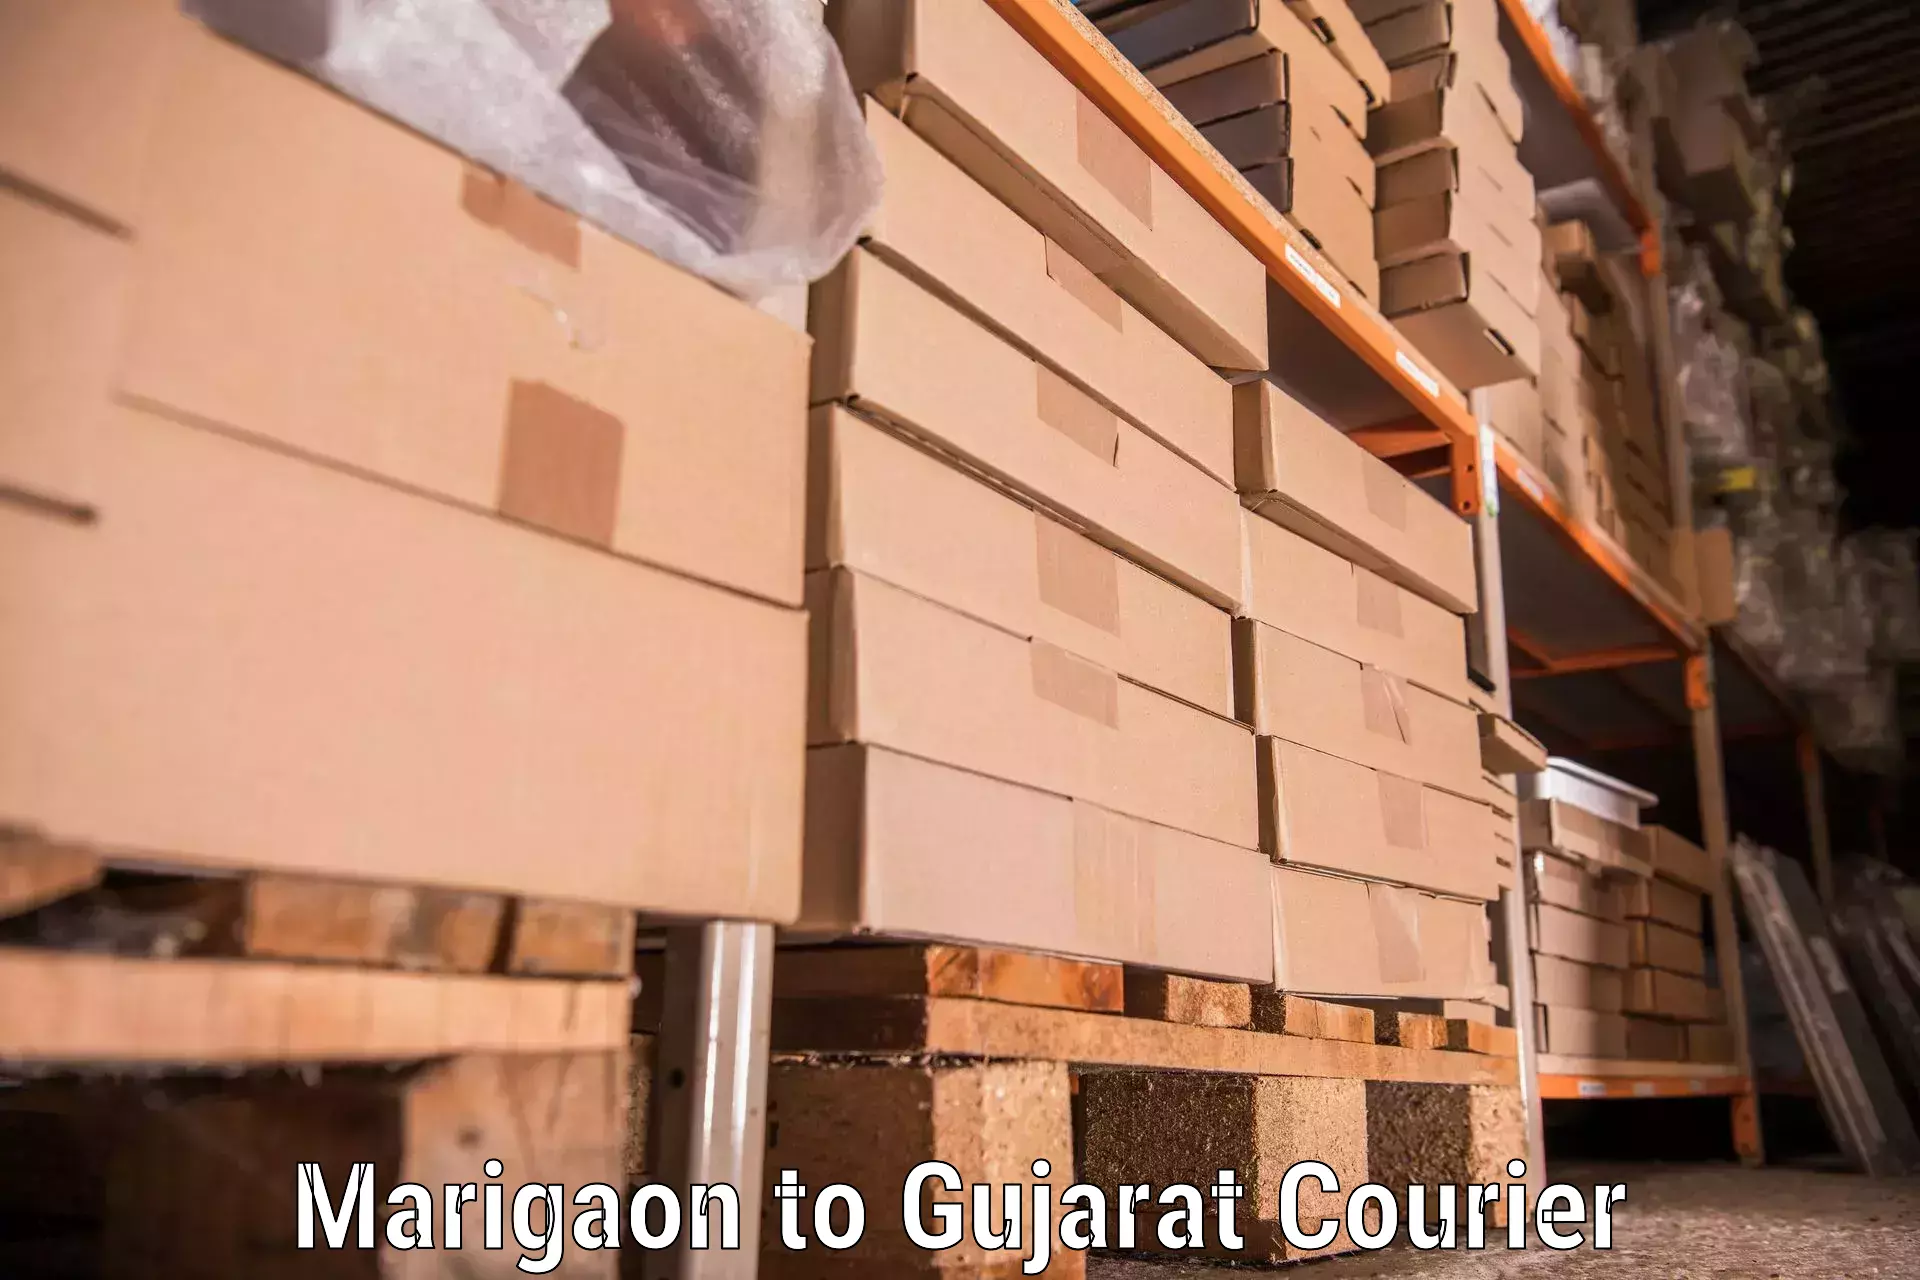 Reliable relocation services Marigaon to Ahmedabad